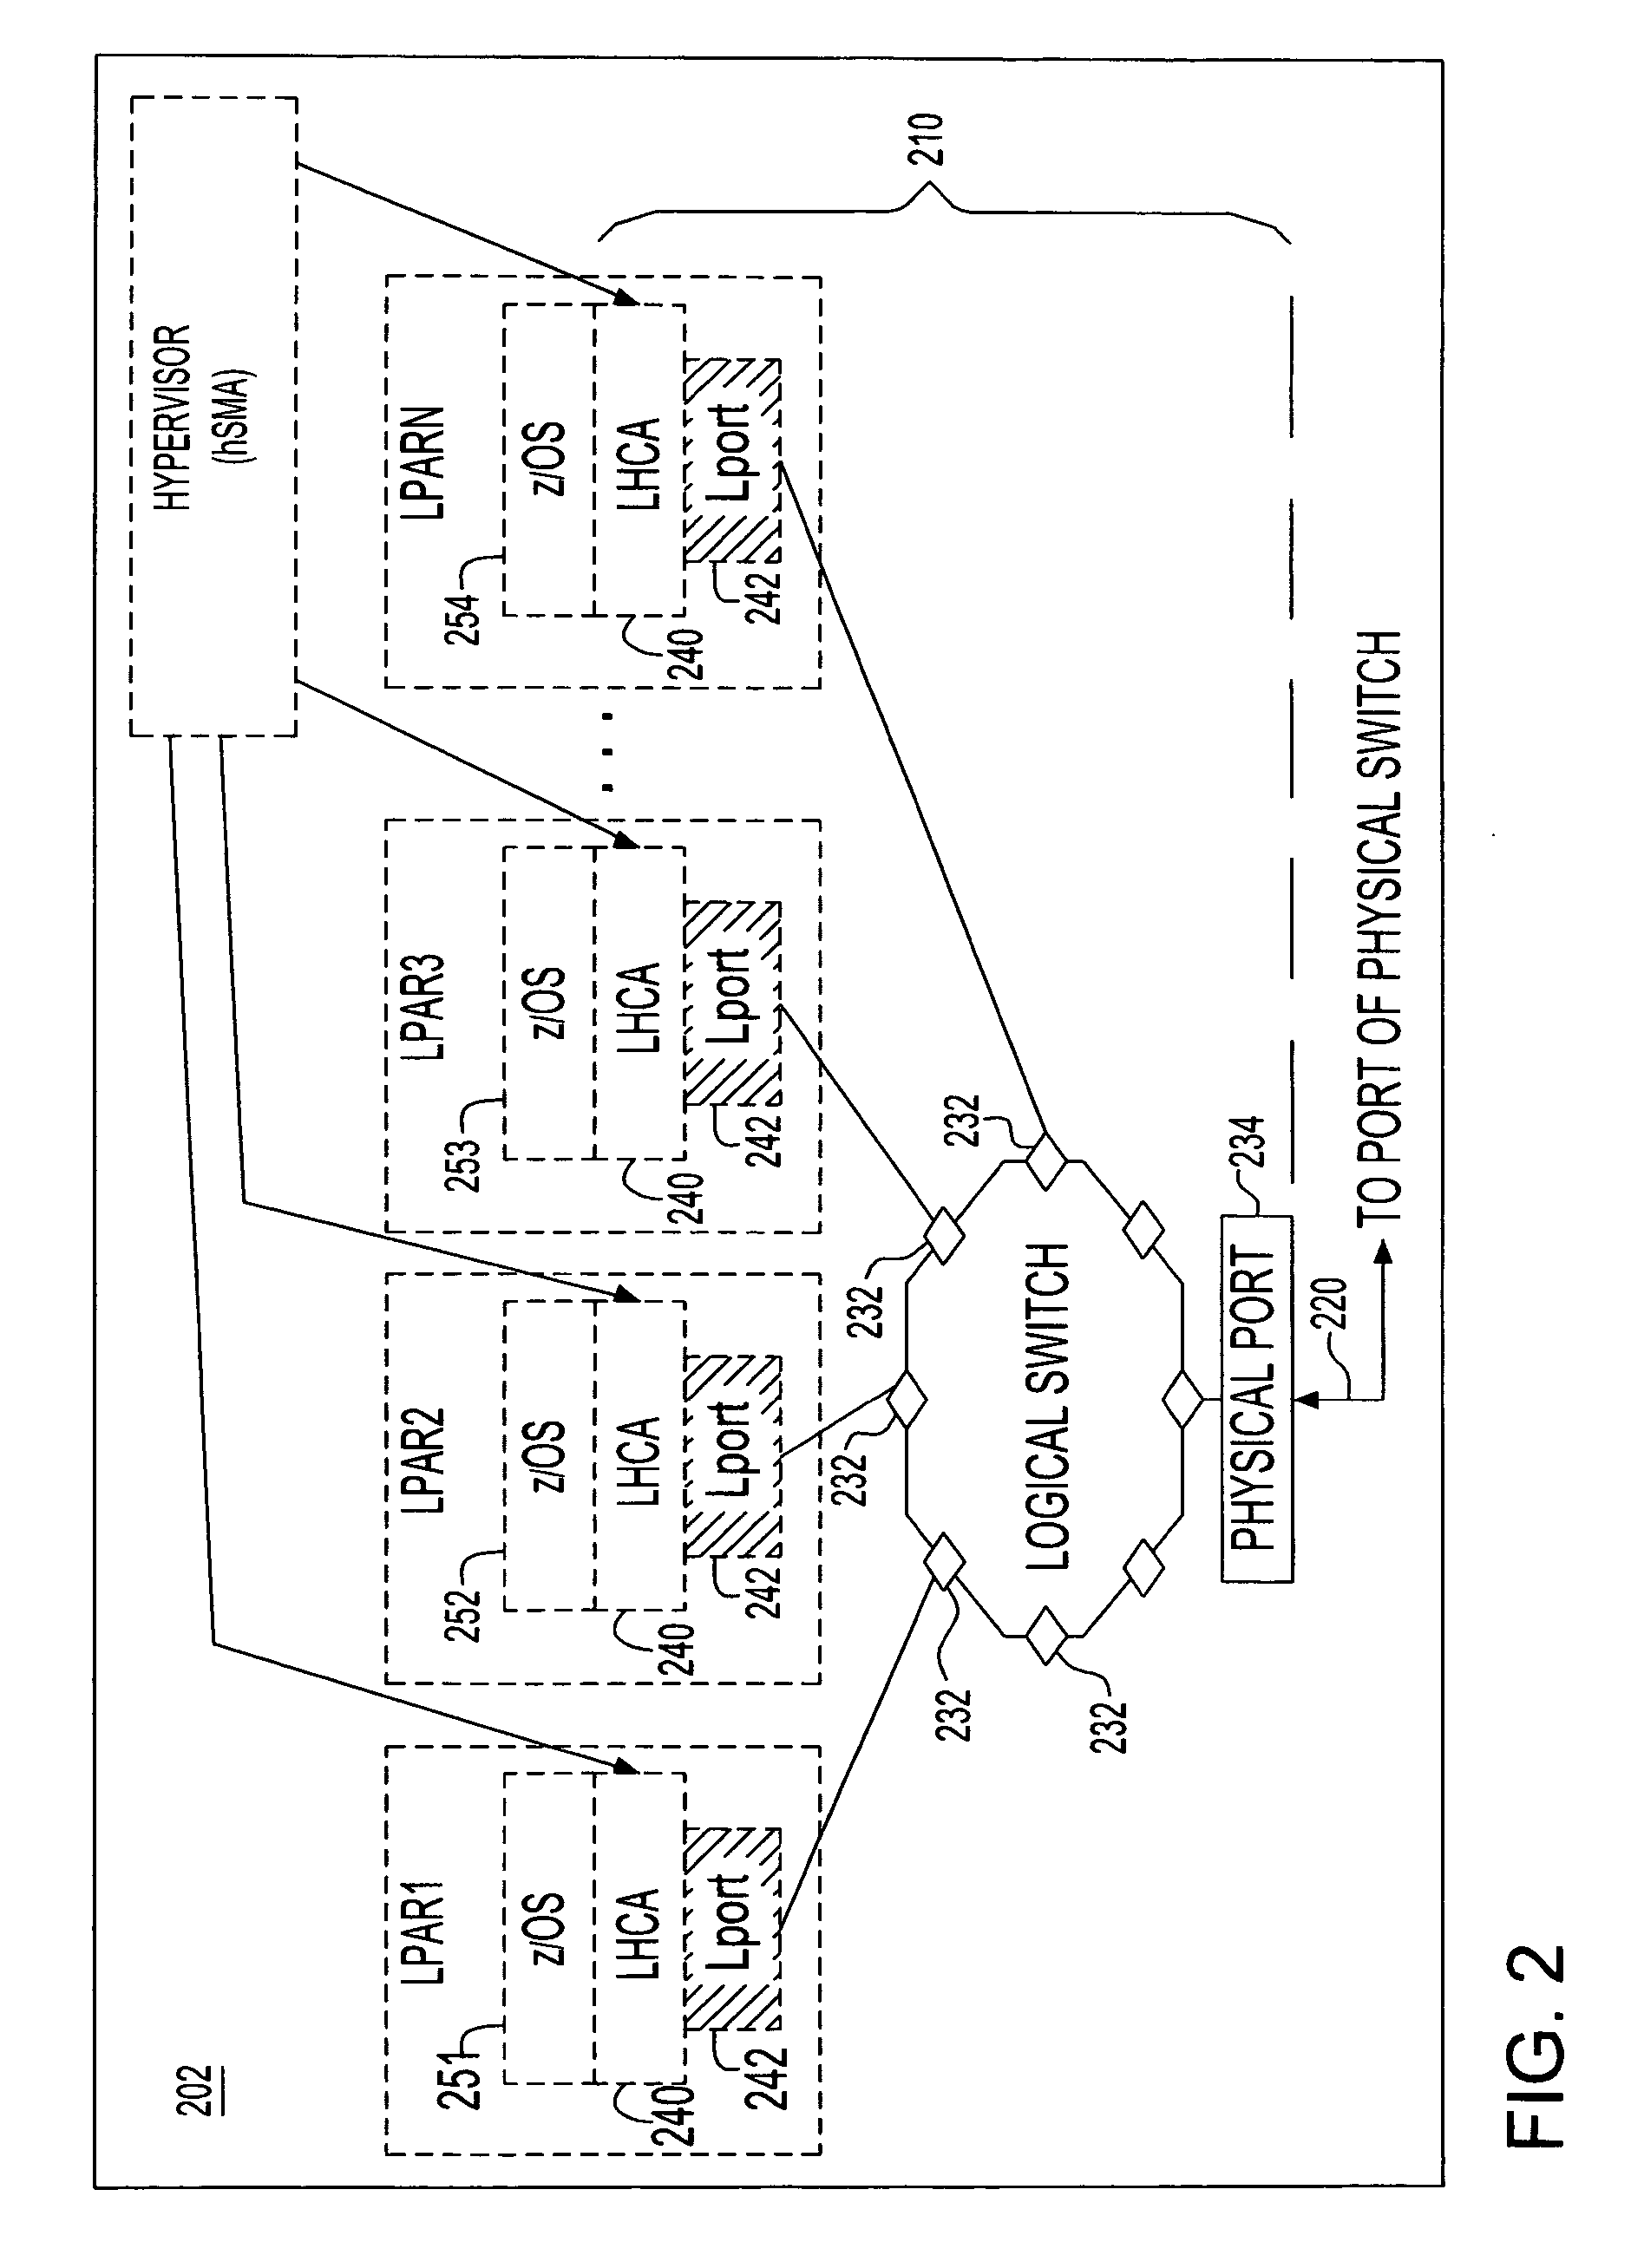 Virtualization of an I/O adapter port using enablement and activation functions